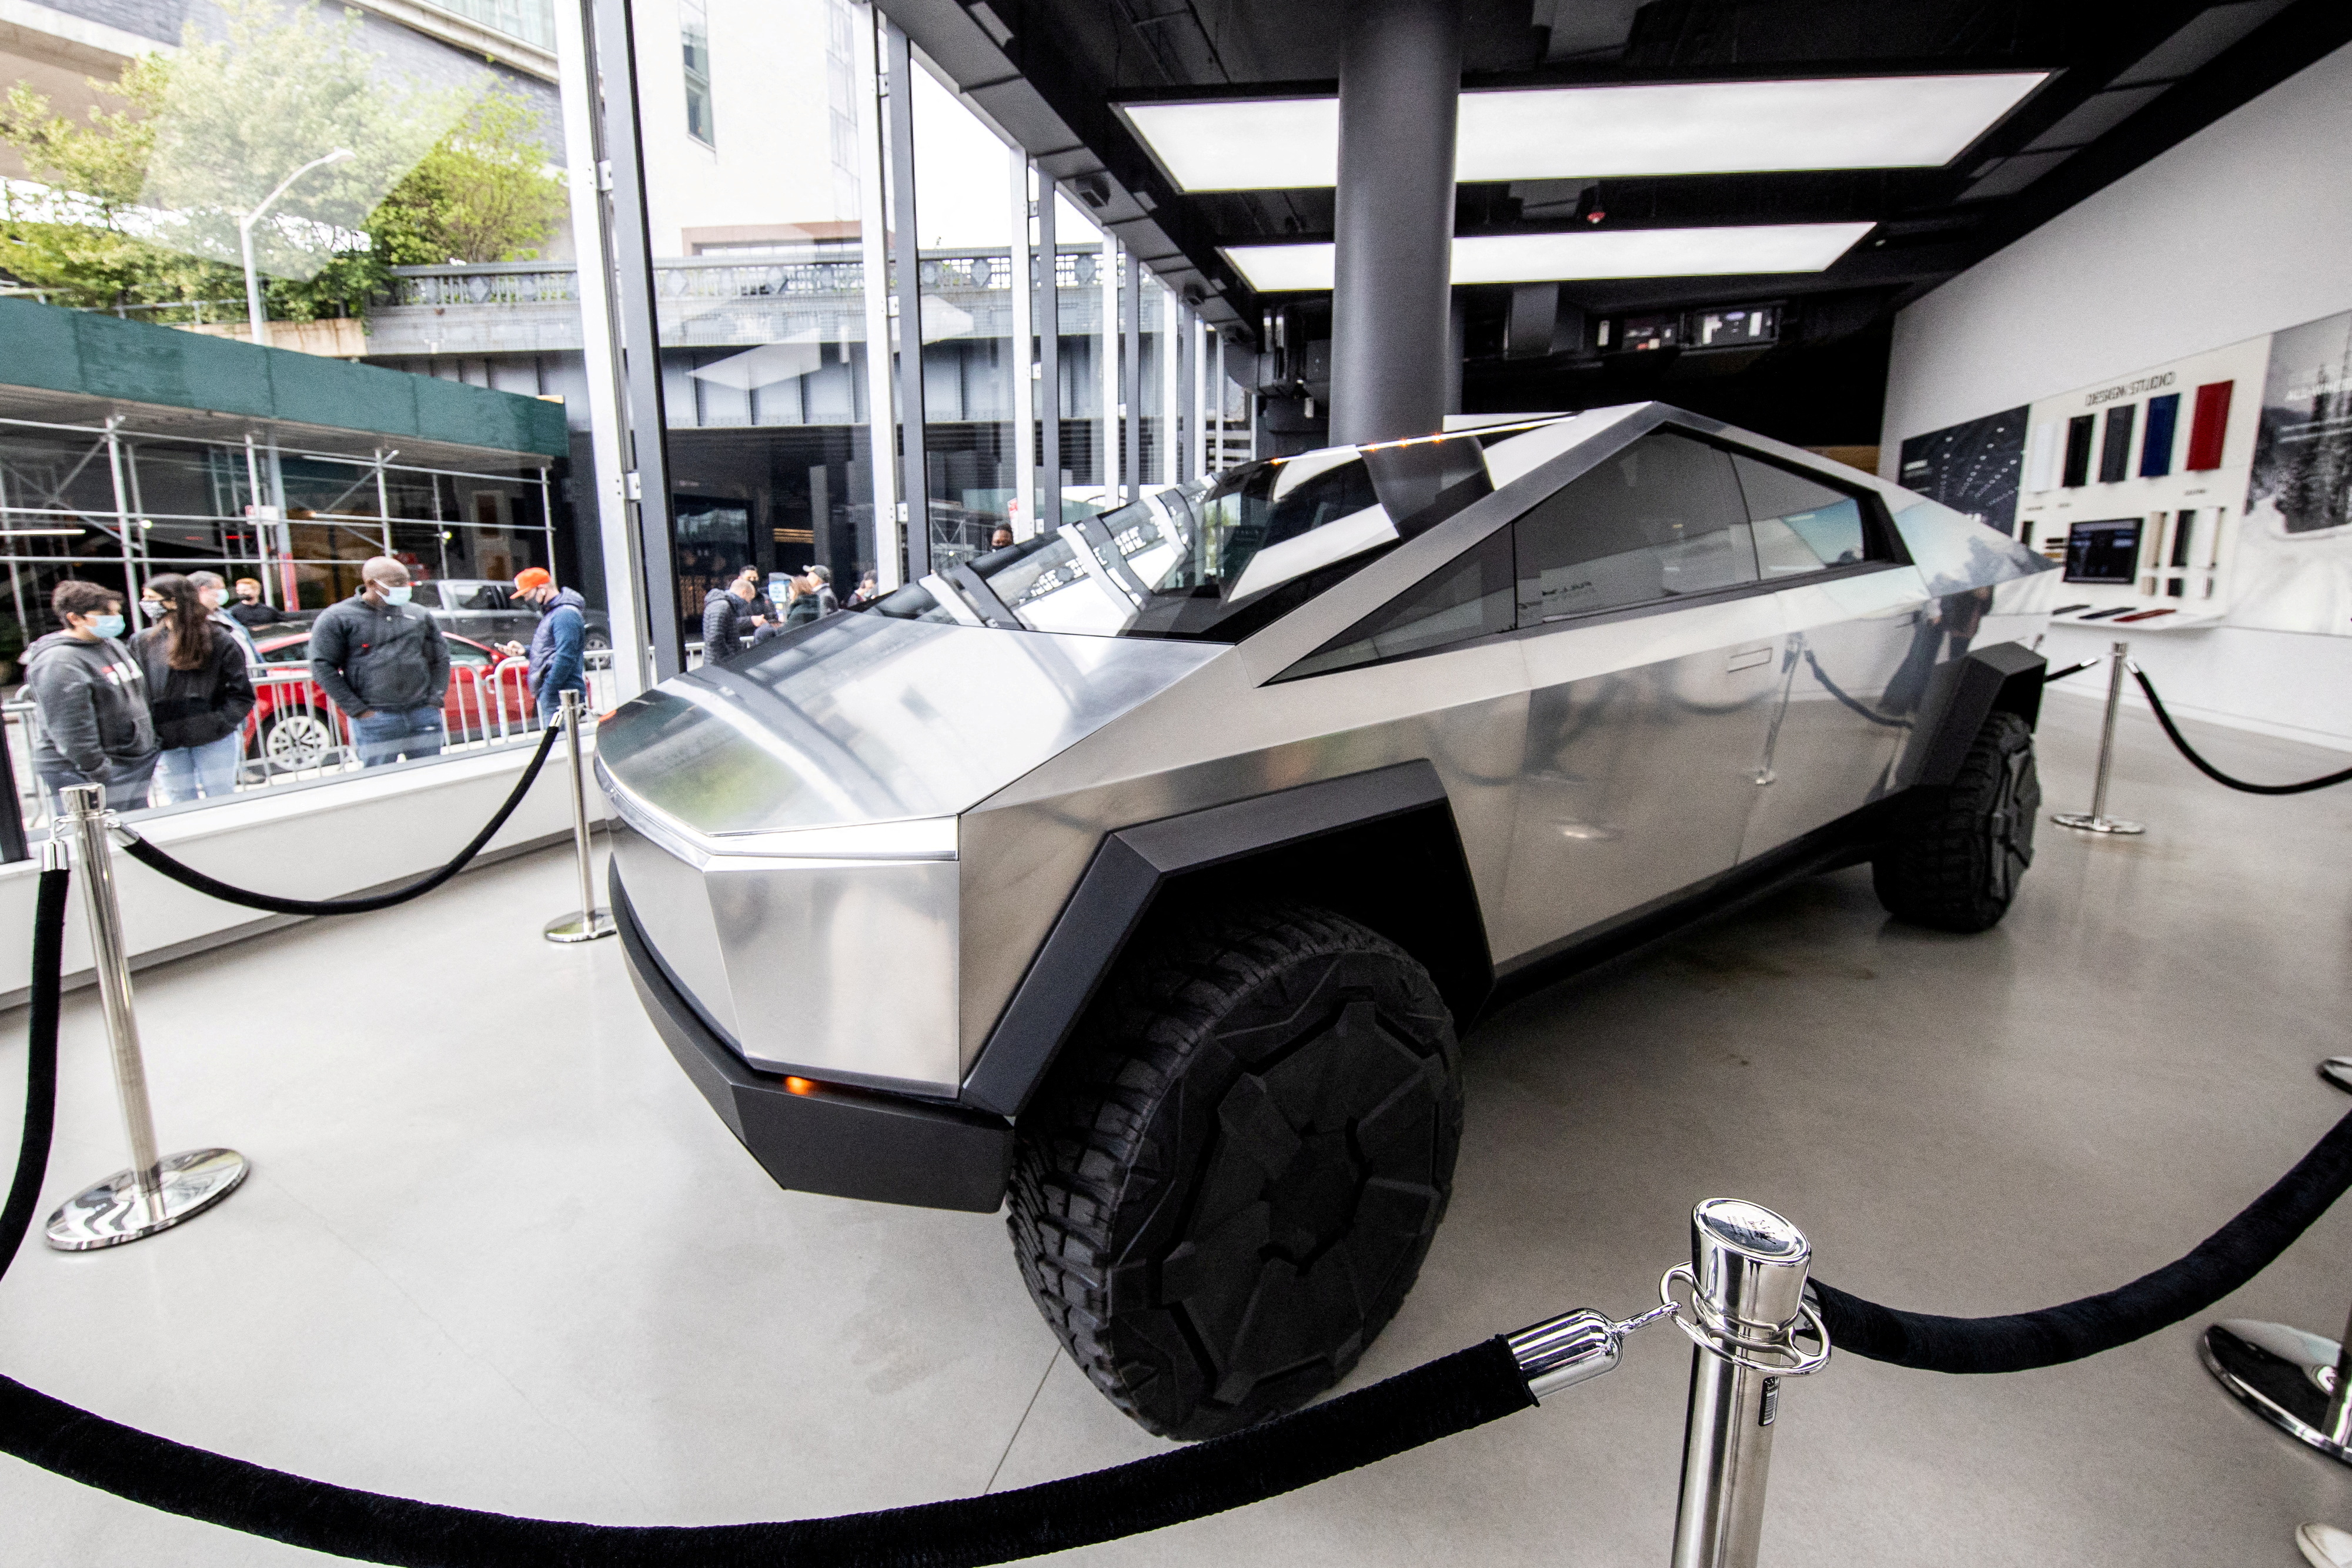 Tesla's Cybertruck is displayed at Manhattan's Meatpacking District in New York City